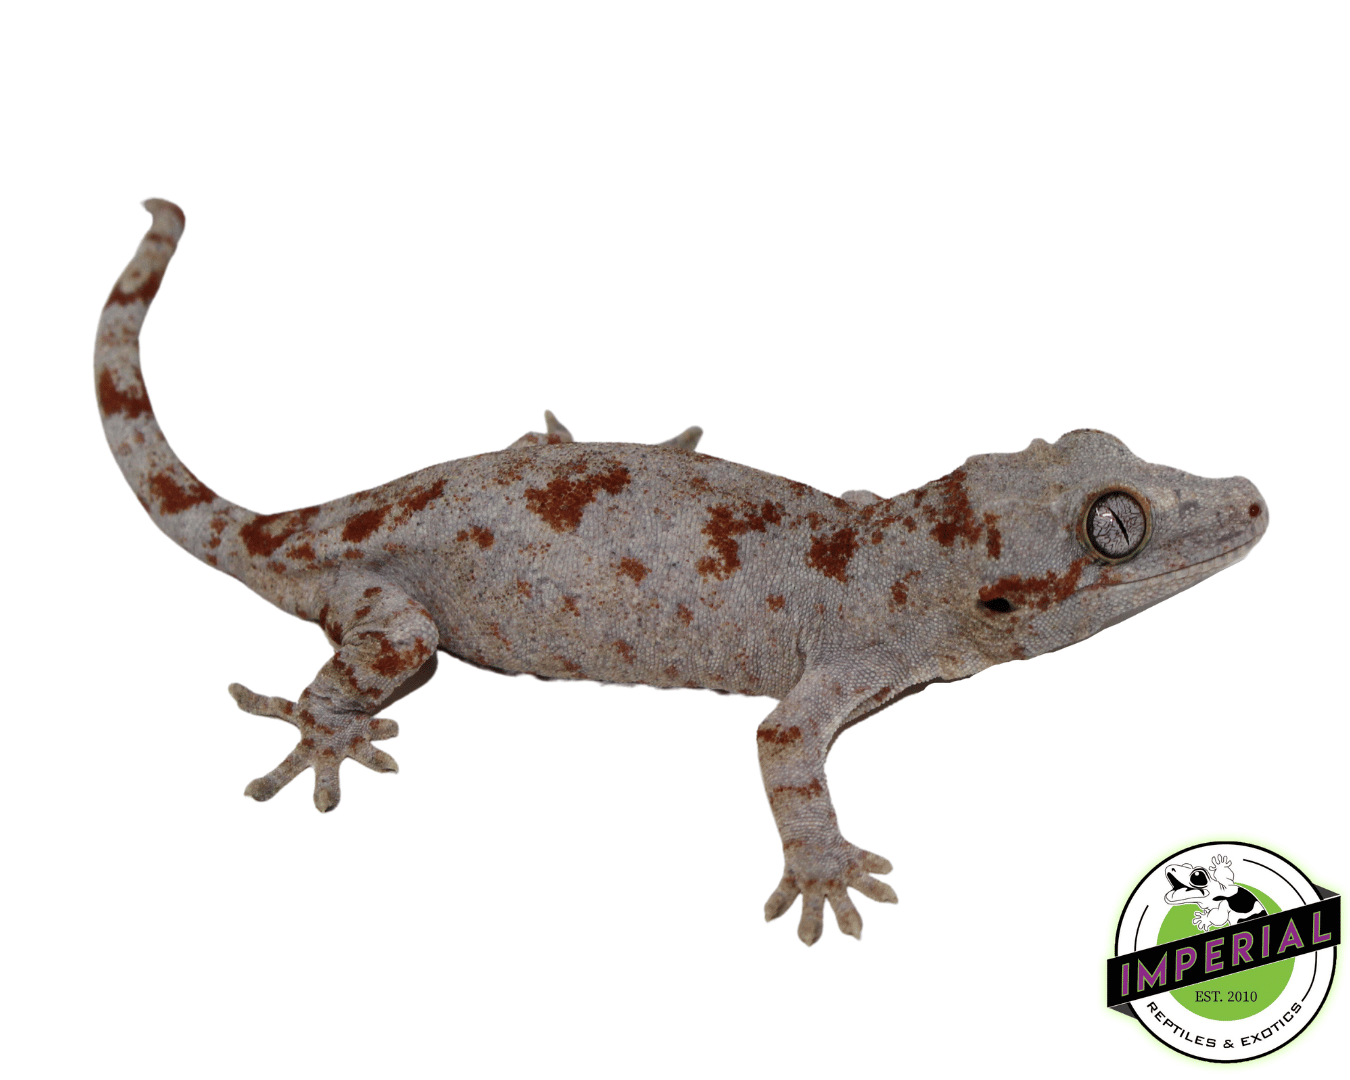 red blotched gargoyle geckos for sale online at cheap prices